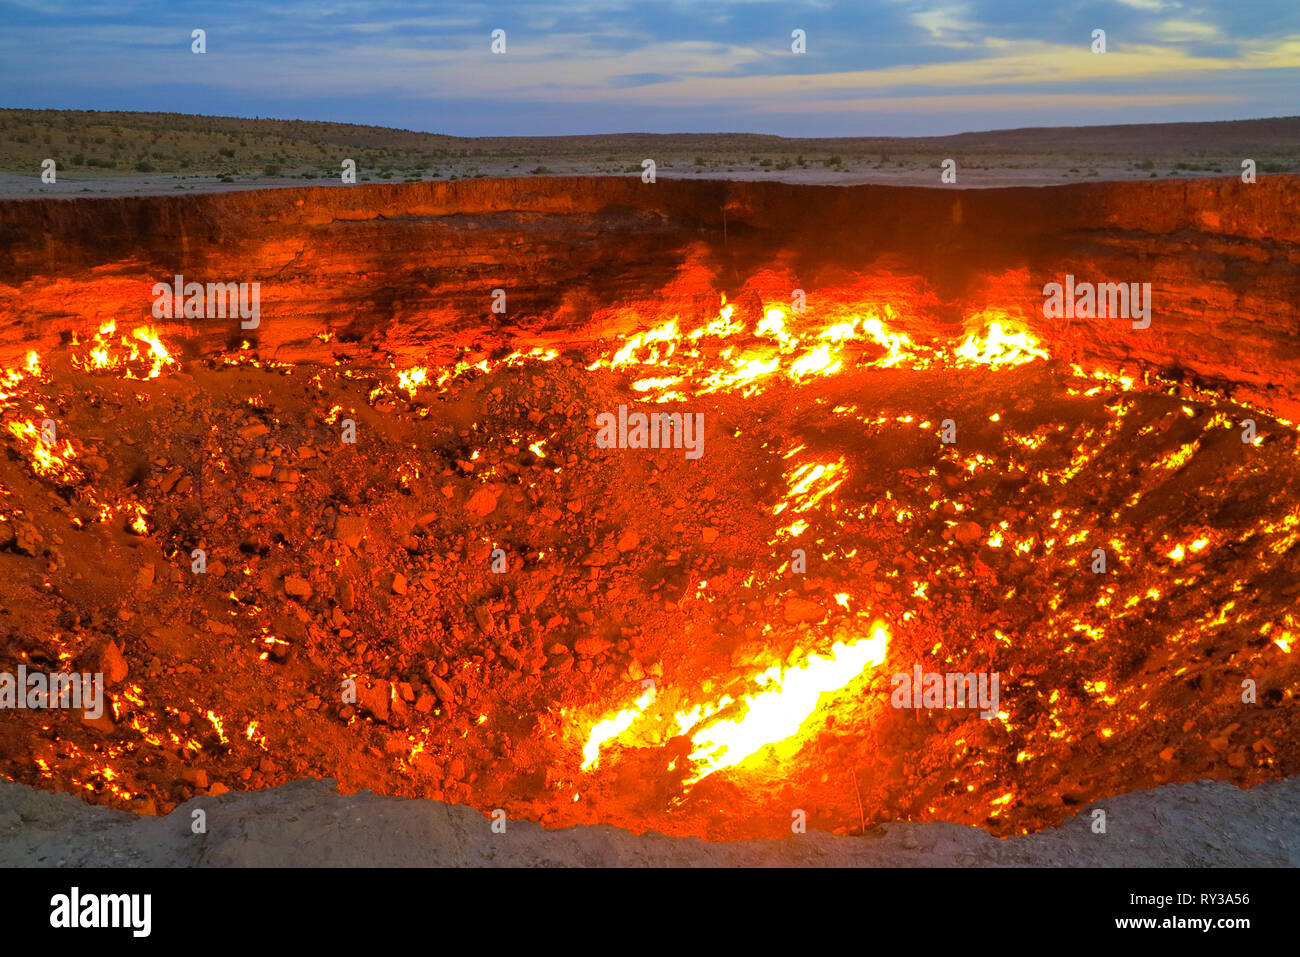 Darvaza Gas Crater Pit Breathtaking Flames Close Up at Sunrise Stock Photo